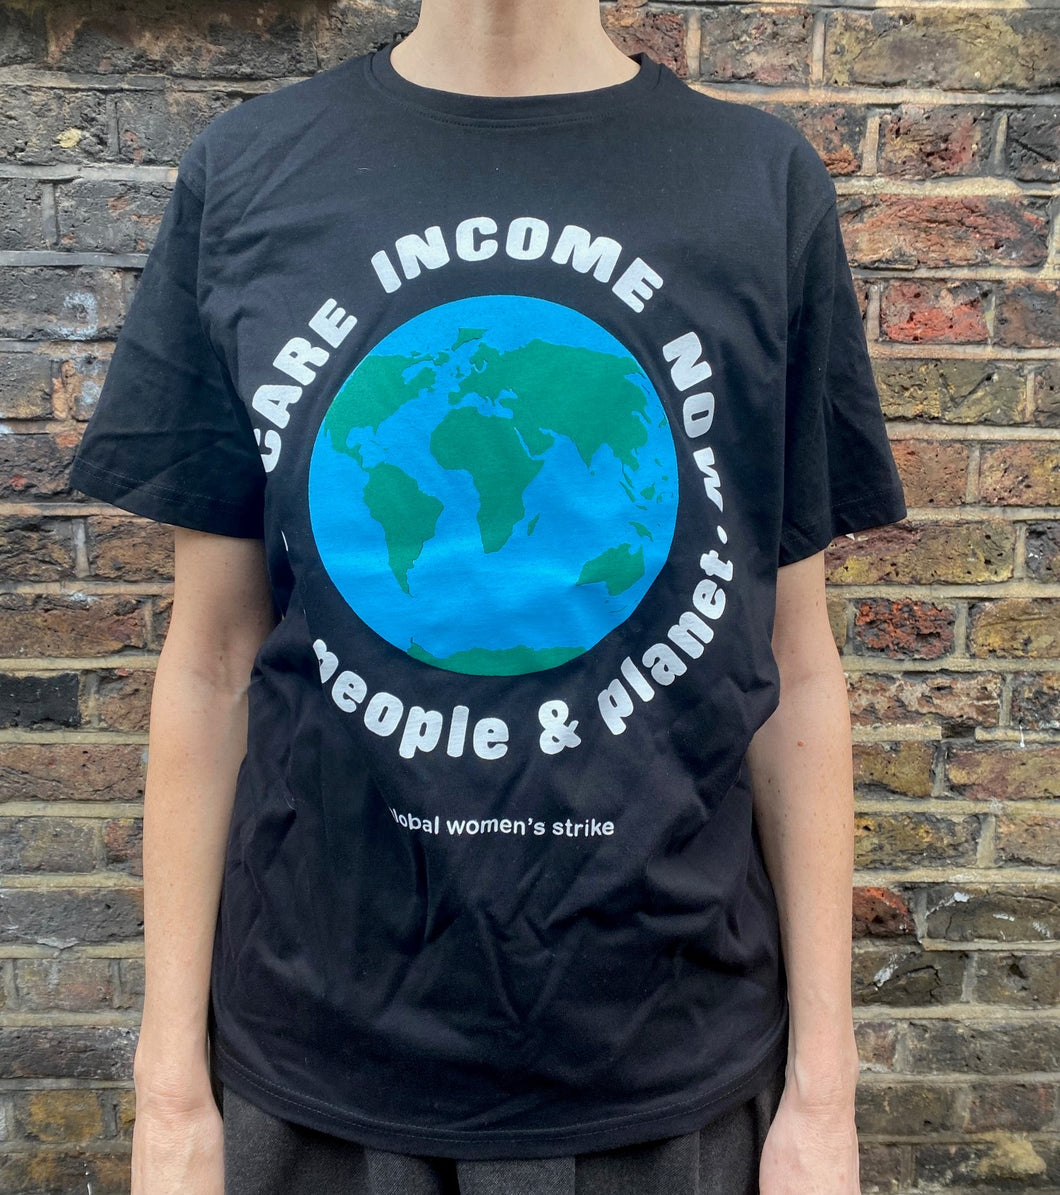 Care Income Now for People & Planet